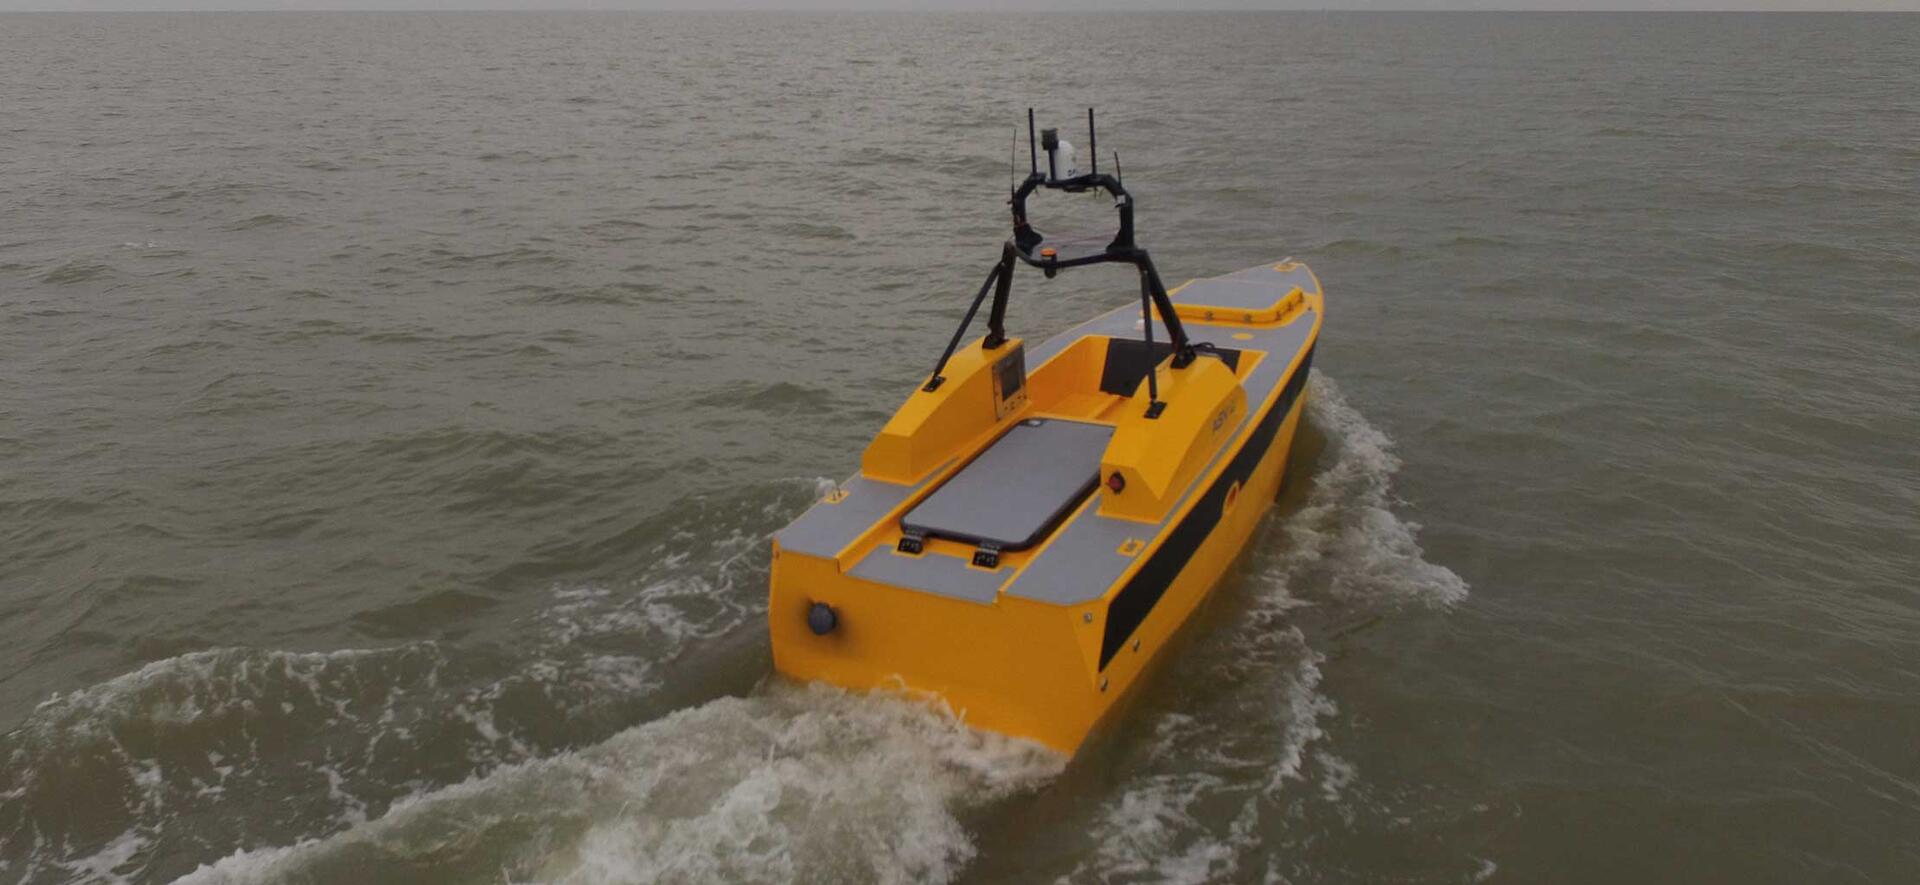 Unmanned Vessel at Sea